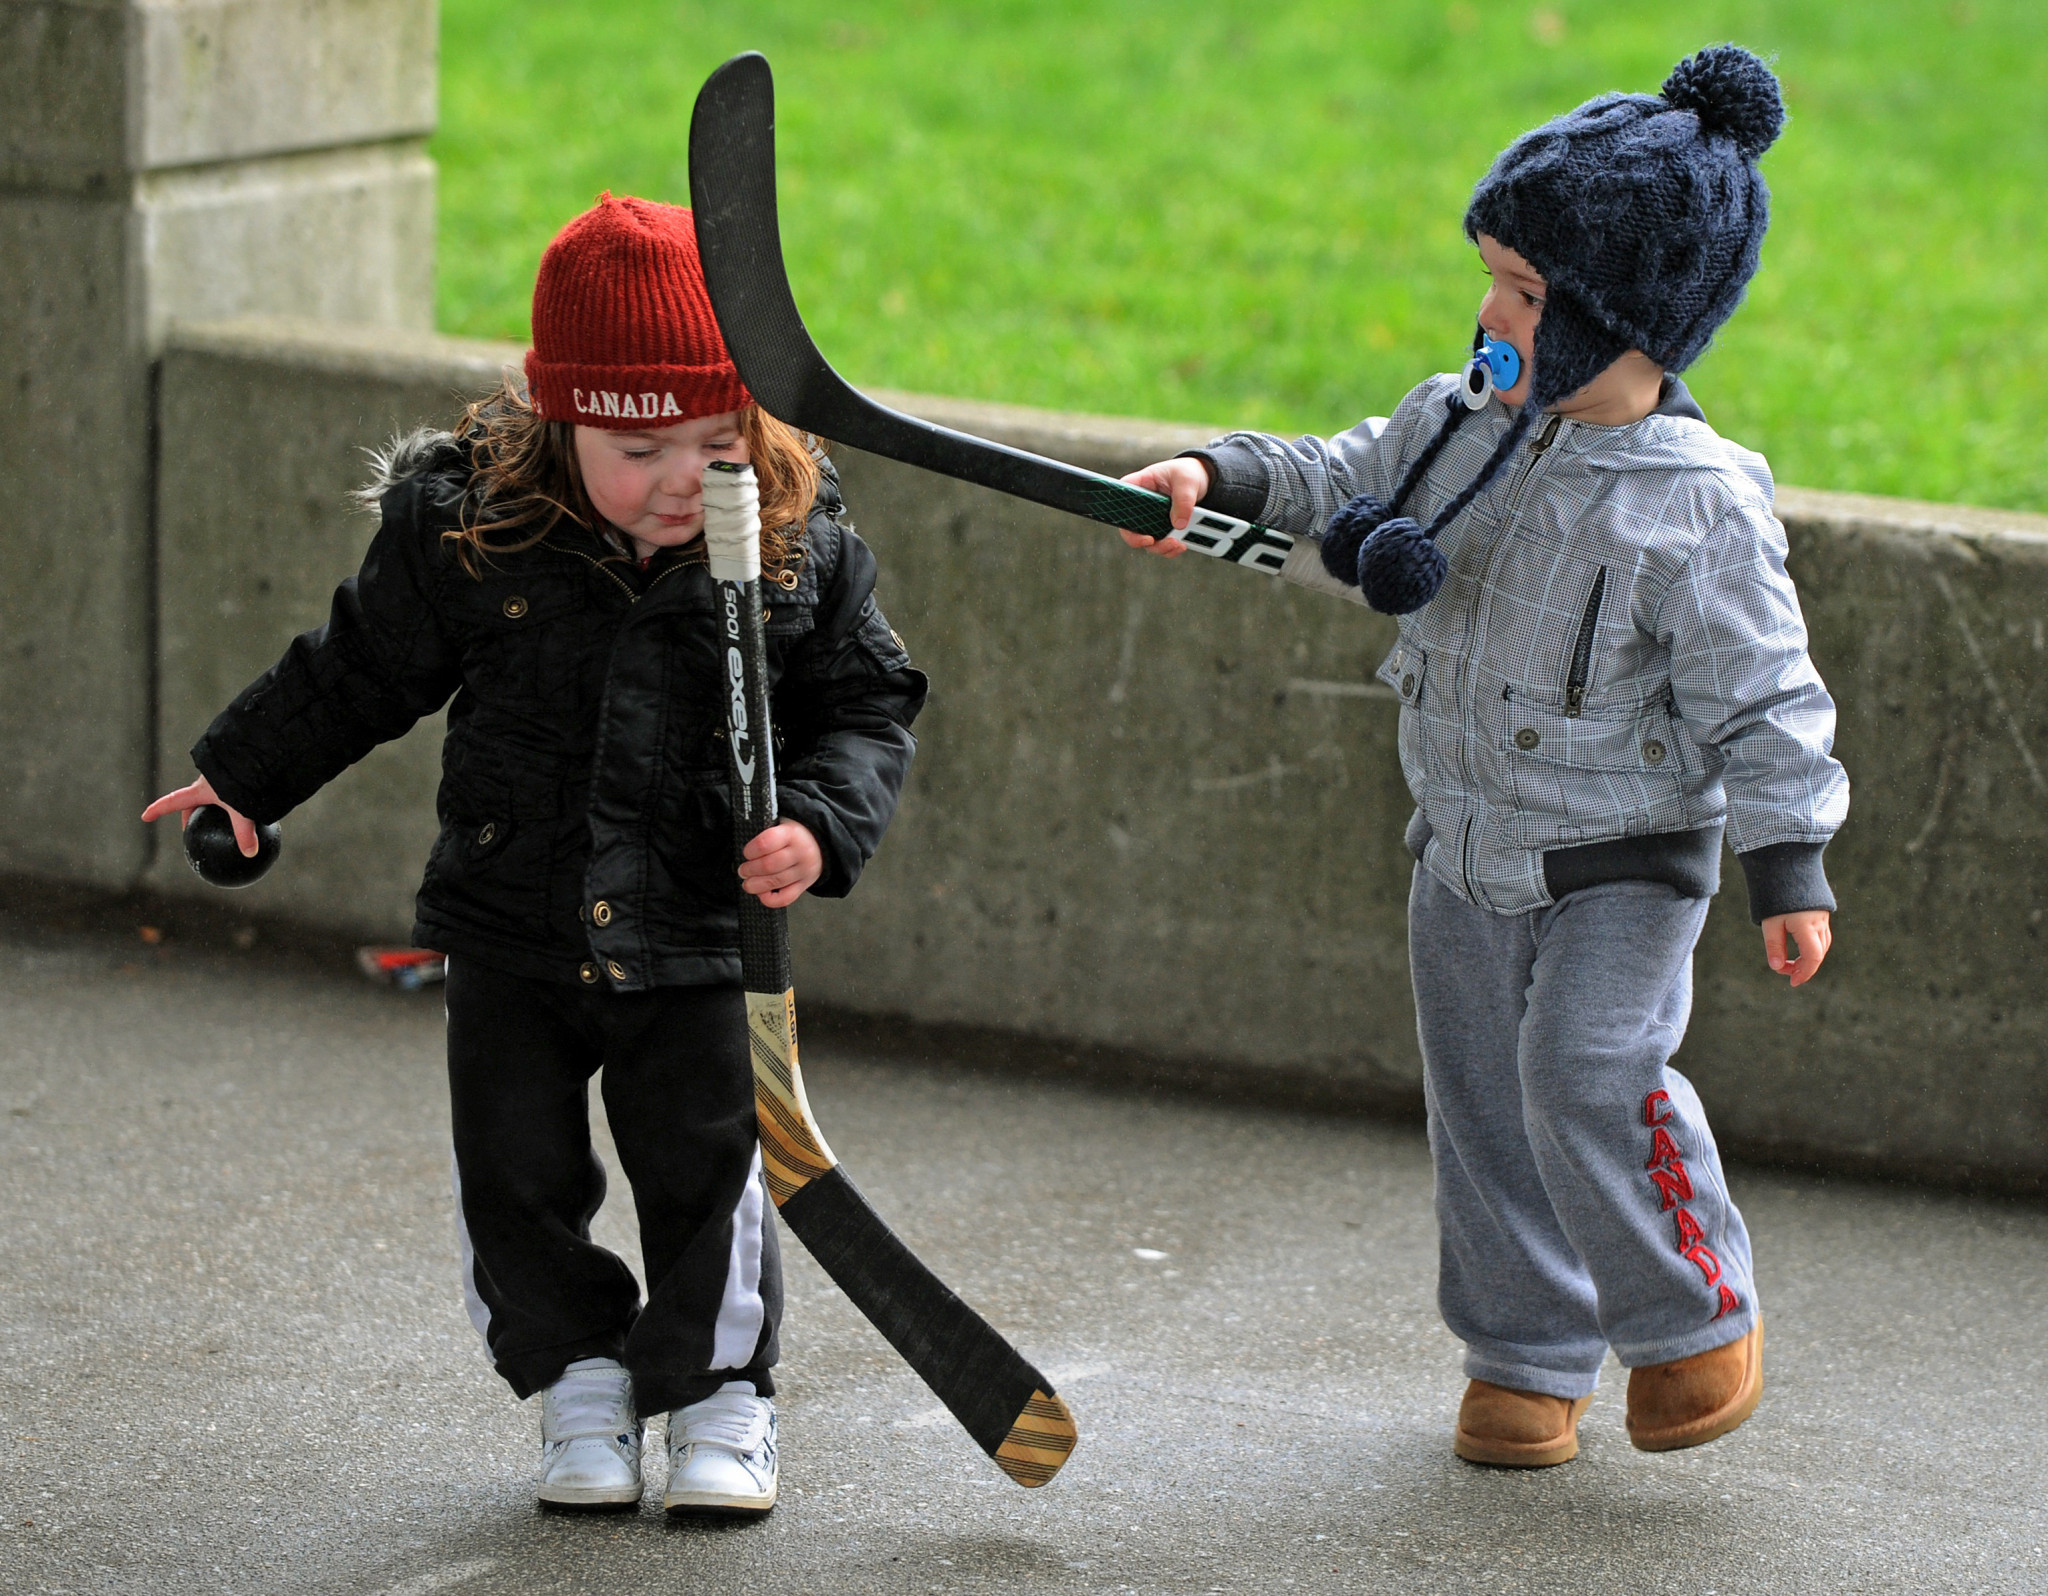 Hockey Canada is attempting to ensure children have access to ice hockey in spite of the coronavirus crisis ©Getty Images